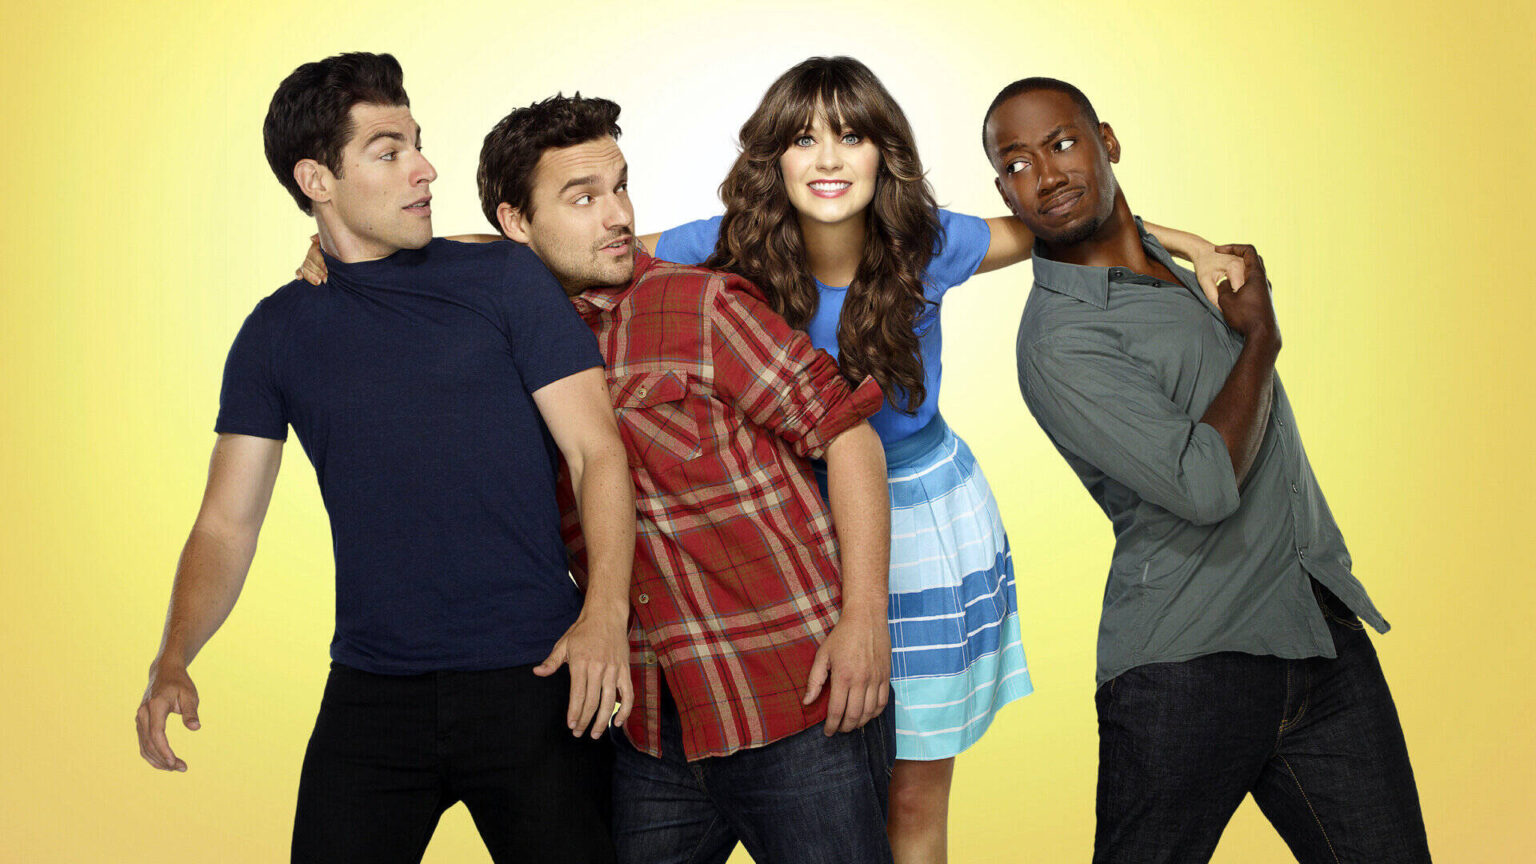 Are you the biggest 'New Girl' fan around? Prove it by getting all the answers right with this trivia quiz.